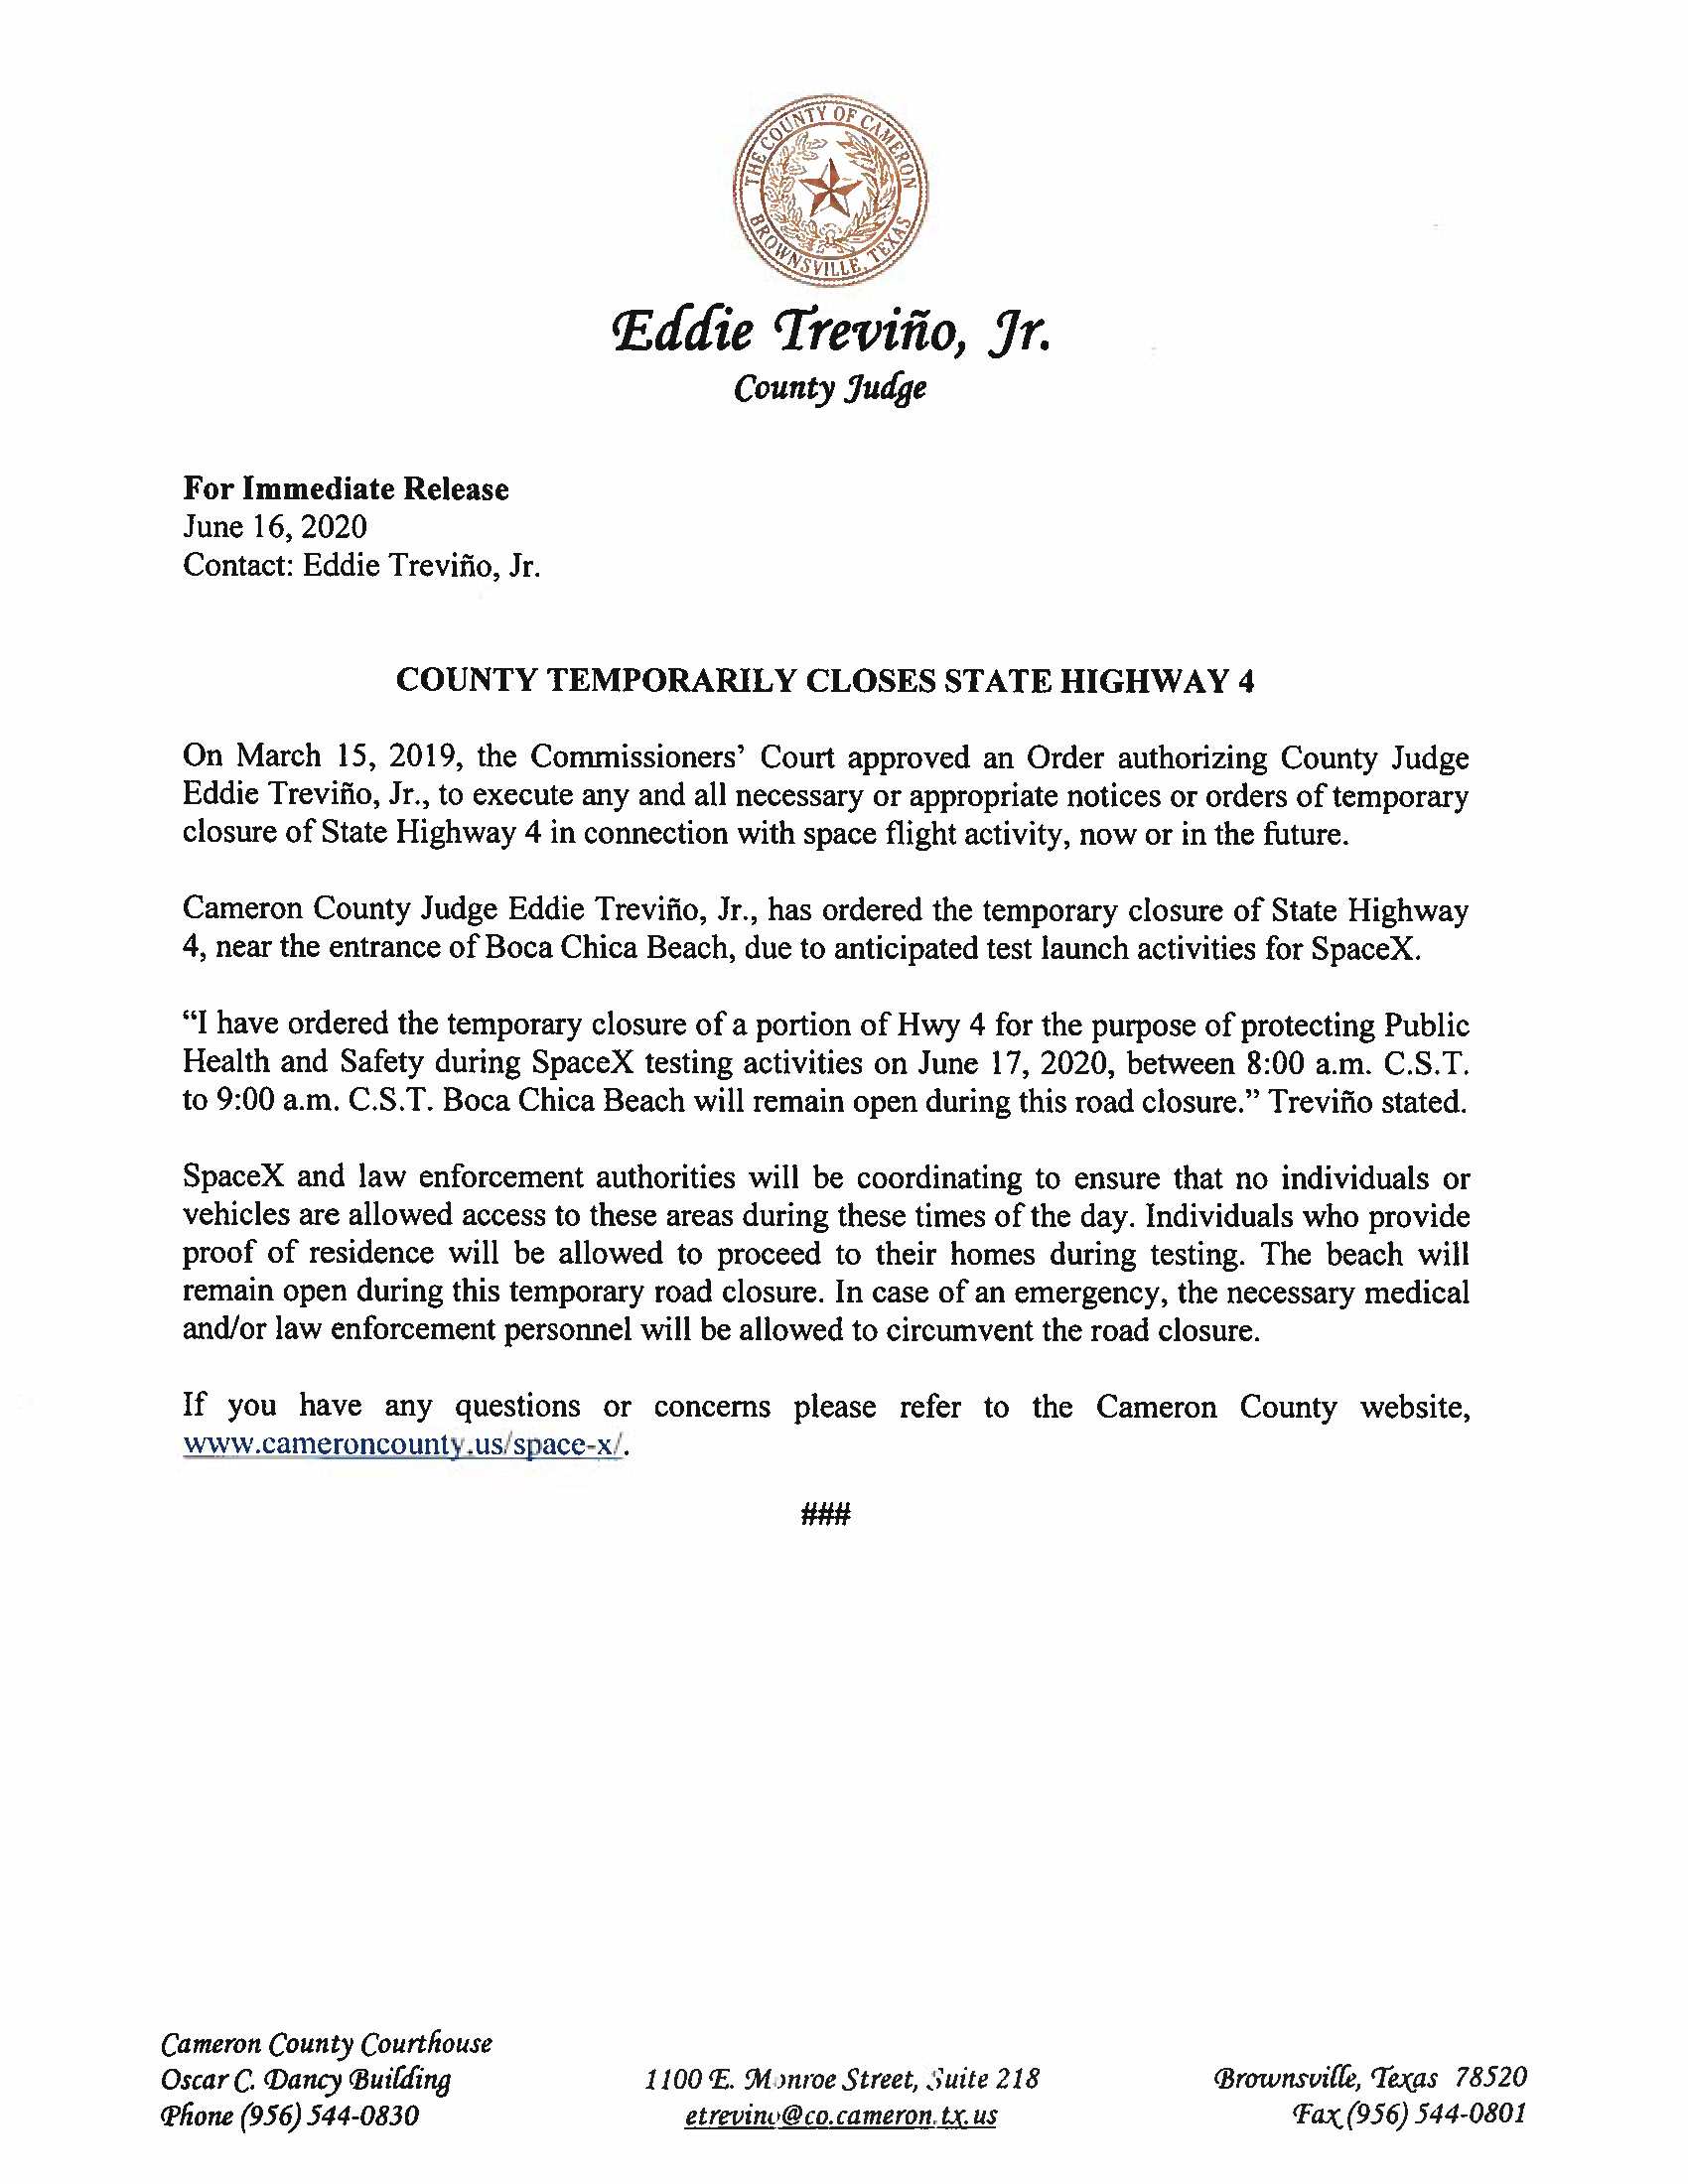 Press Release On Order Of Closure Related To SpaceX Flight.ROAD CLOSURE English Spanish. 06.17.20.doc Page 1